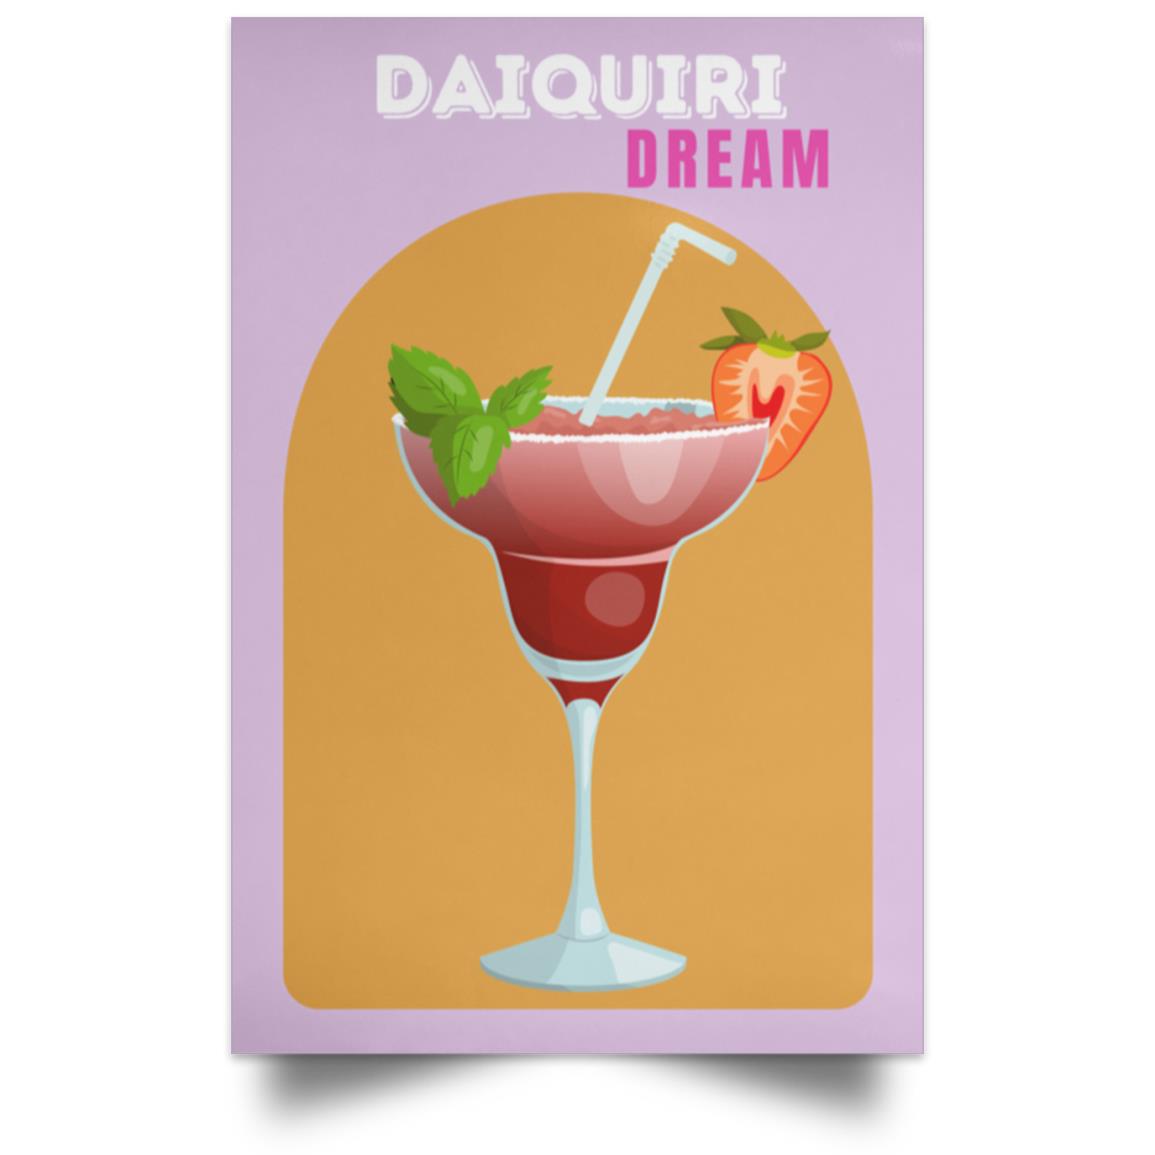 Get trendy with DAIQUIRI dREAM Daiquiri Dream - Housewares available at Good Gift Company. Grab yours for $6.75 today!